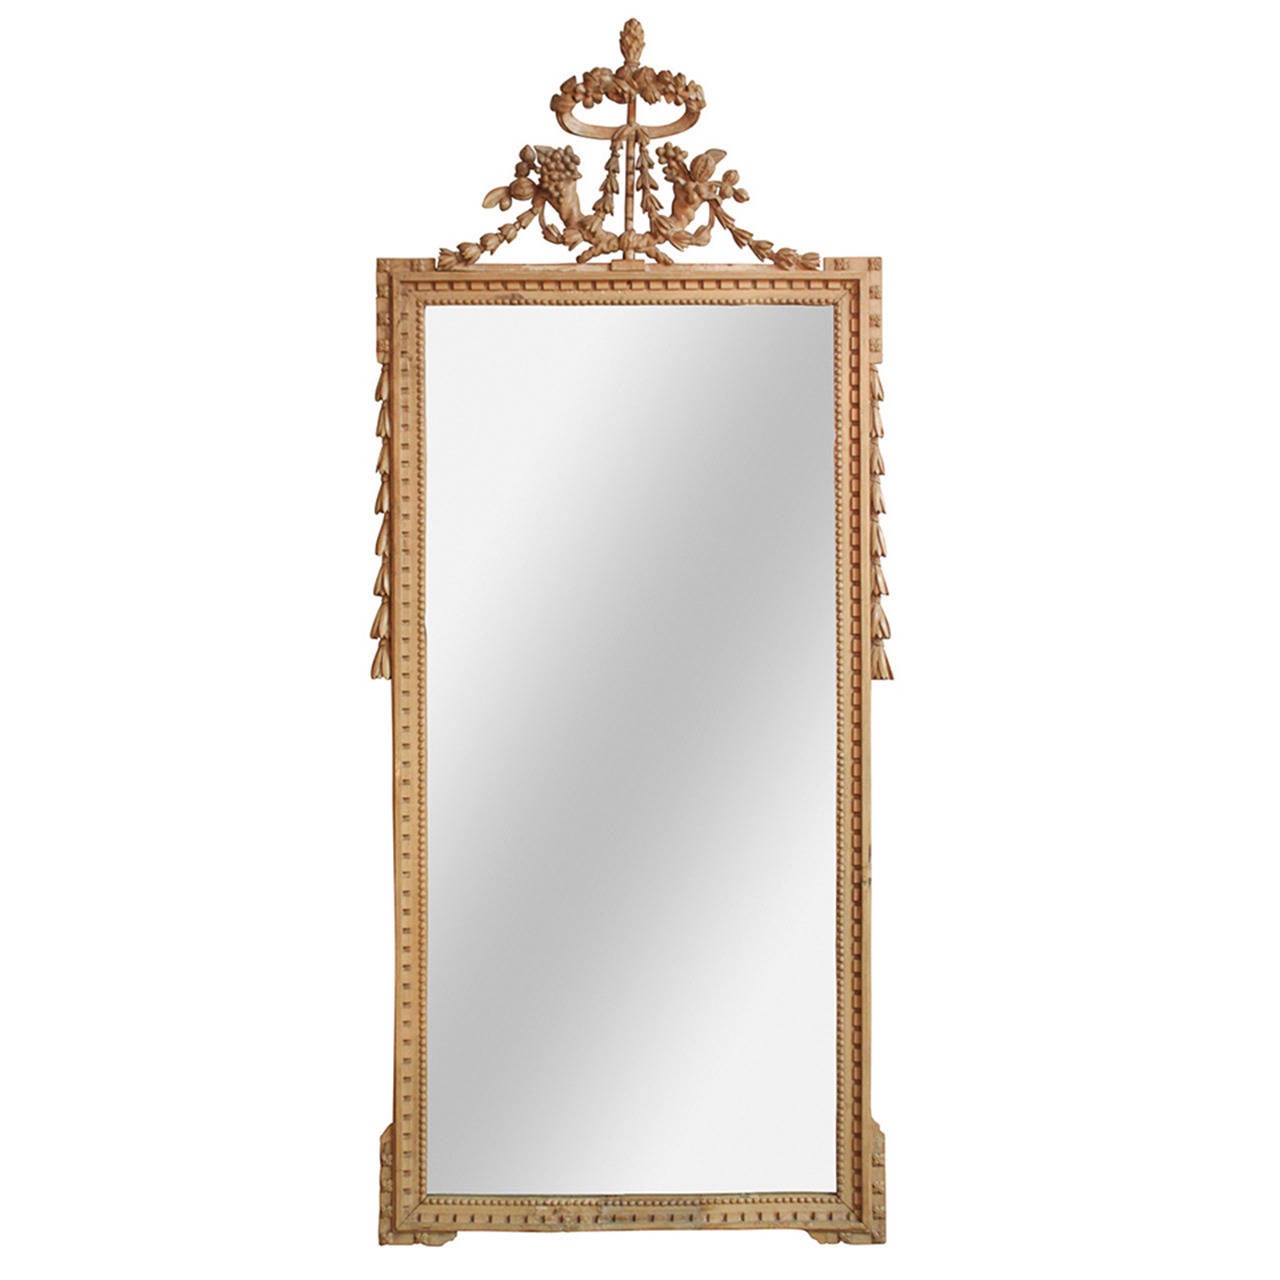 French Neoclassical Carved Wood Mirror For Sale at 1stdibs